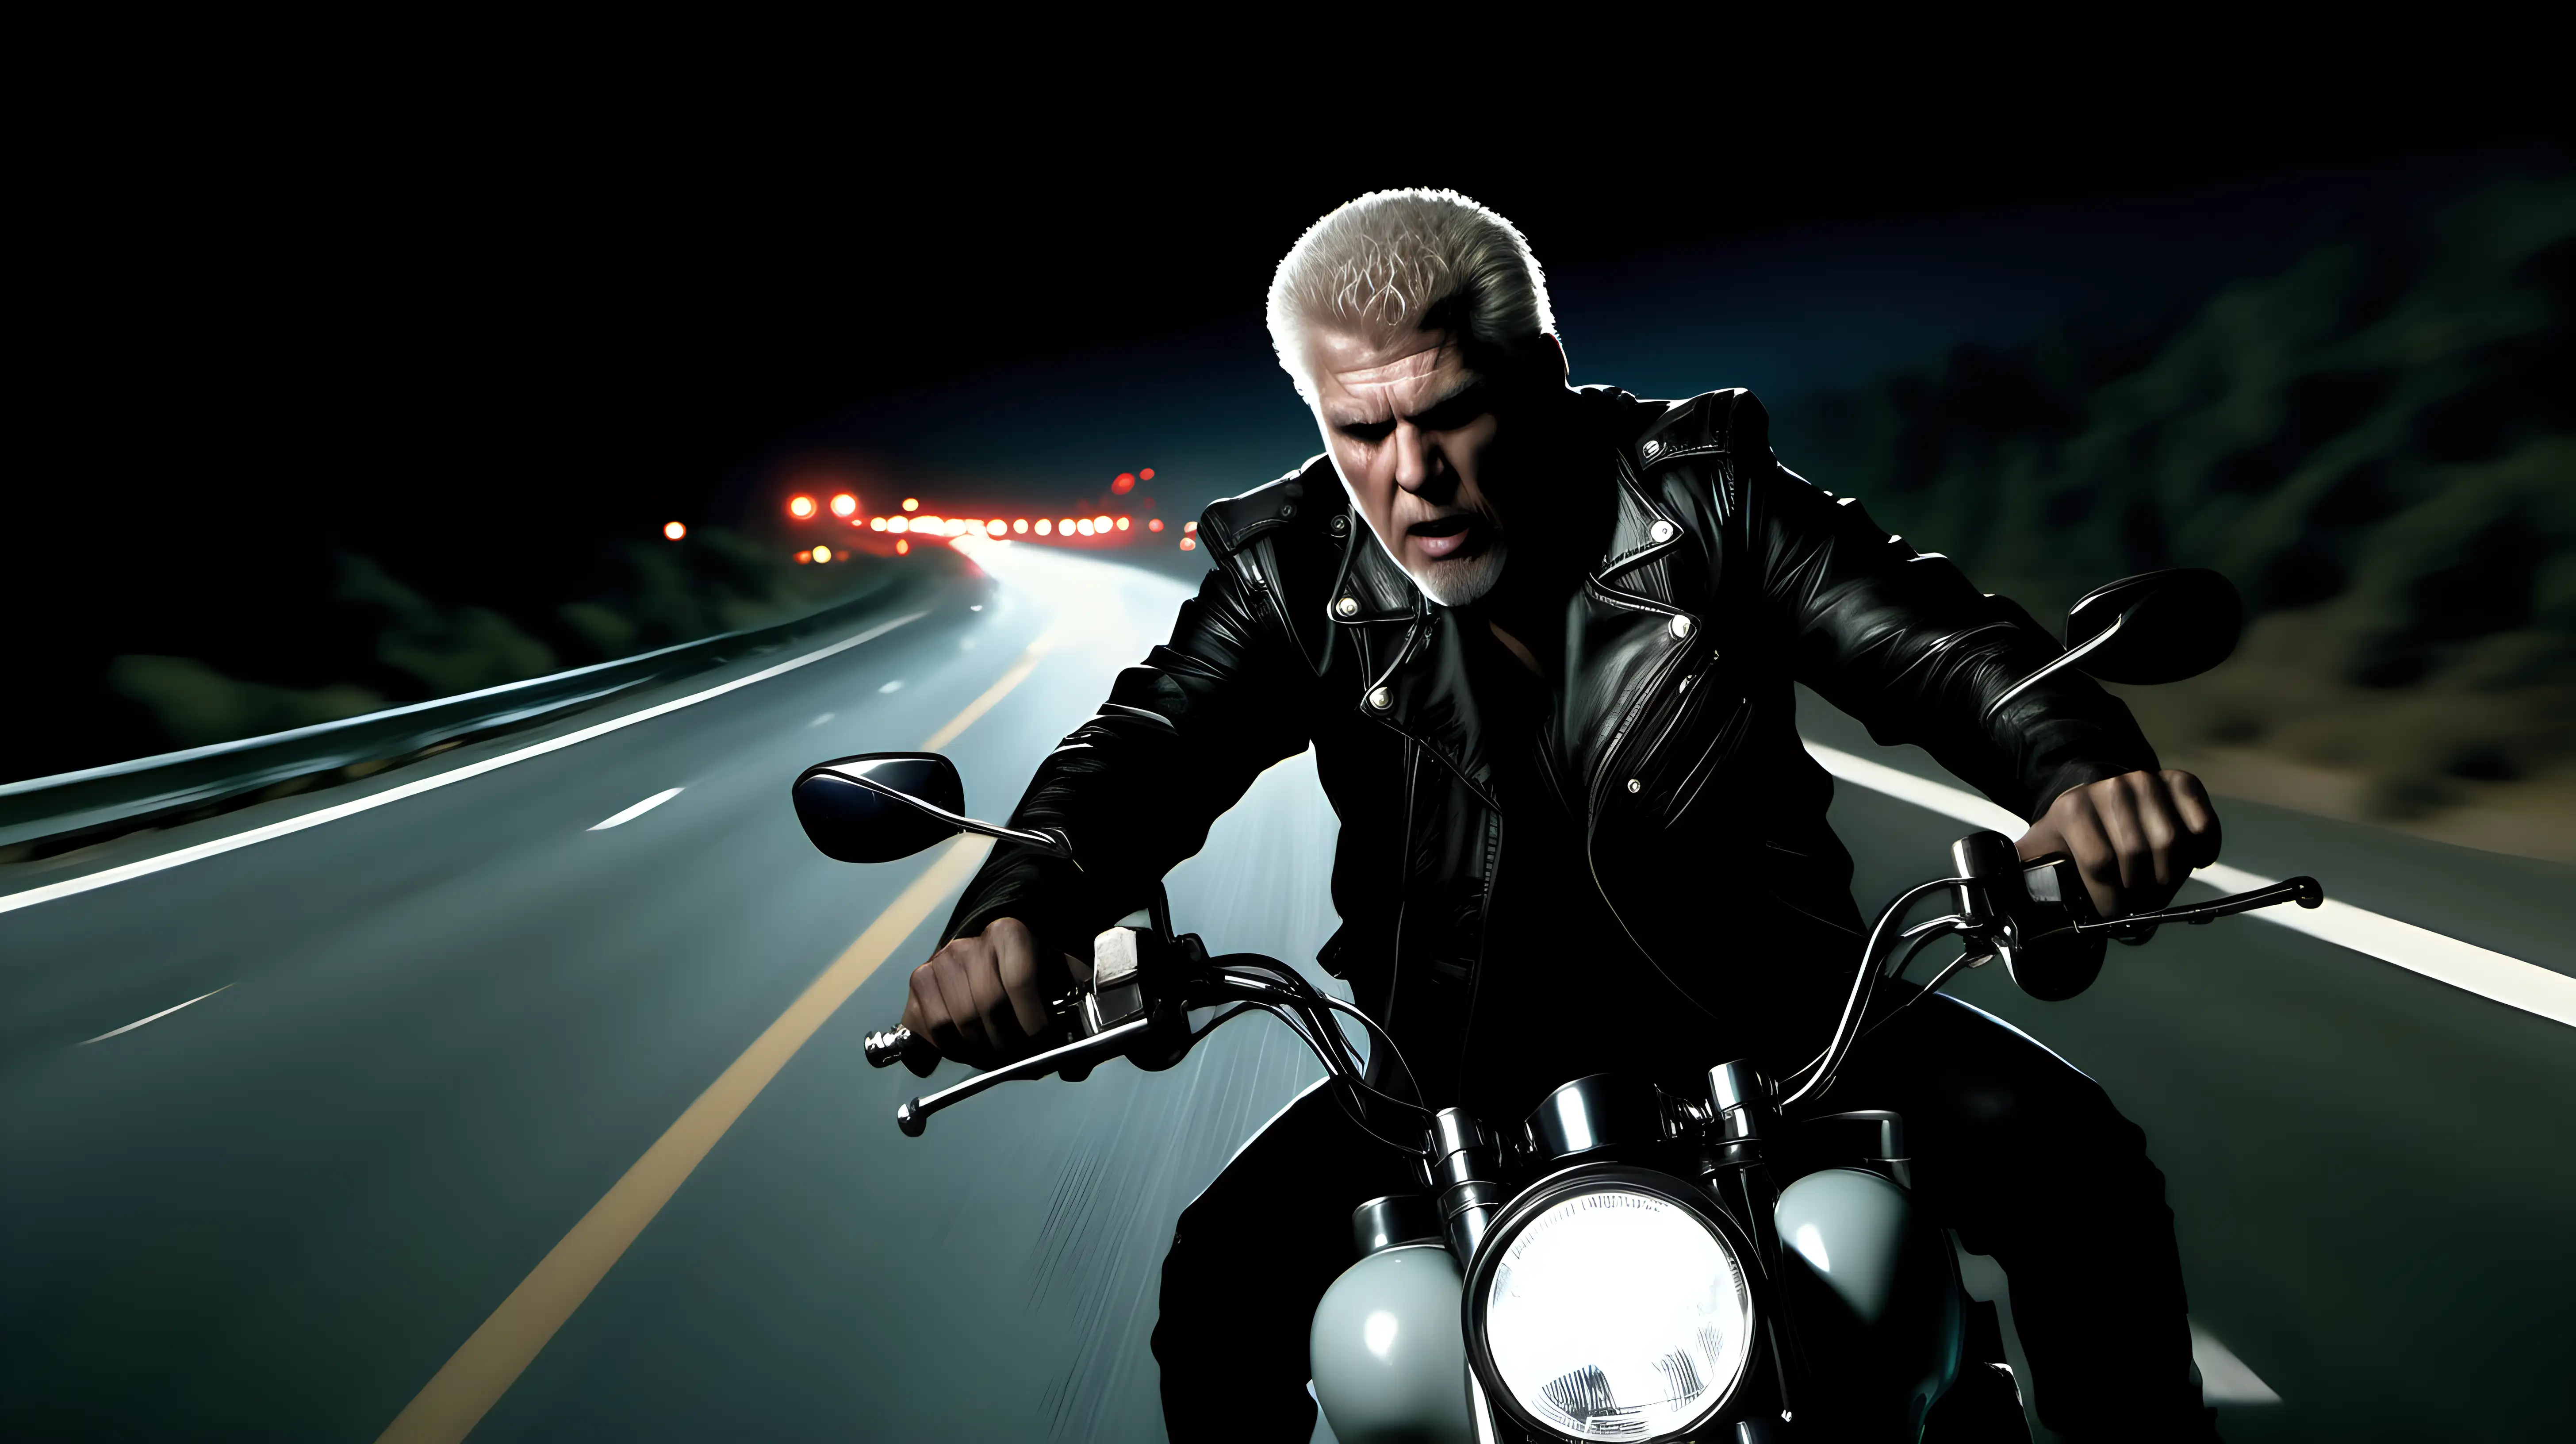 Time of day: Night
Subject: A biker, navigating the highway
Setting: Riding a motorcycle on a dark, winding highway at night
Background: The open road stretches ahead, with only the beam of the bike's headlight piercing the darkness
Style/Coloring: A sense of freedom and speed on the nighttime highway, illuminated by the bike's headlight
Action: The biker rides along the highway, experiencing a sudden assault as the woman (resembling Natalie Portman) in the car ahead throws a handful of coins at him. The coins are visible in mid-air, glinting in the headlight's beam, and some have struck the biker in the face, momentarily startling him.
Items: The motorcycle, the dark highway, and the car ahead contribute to the dynamic scene, with coins suspended in the air
Costume/Appearance: The biker, bearing a resemblance to Ron Perlman, is dressed in his rugged leather jacket and jeans, typical of his persona
Accessories: The coins thrown by the woman, the dark night highway, and the car ahead, with its unexpected action, create a tense and startling moment in the night